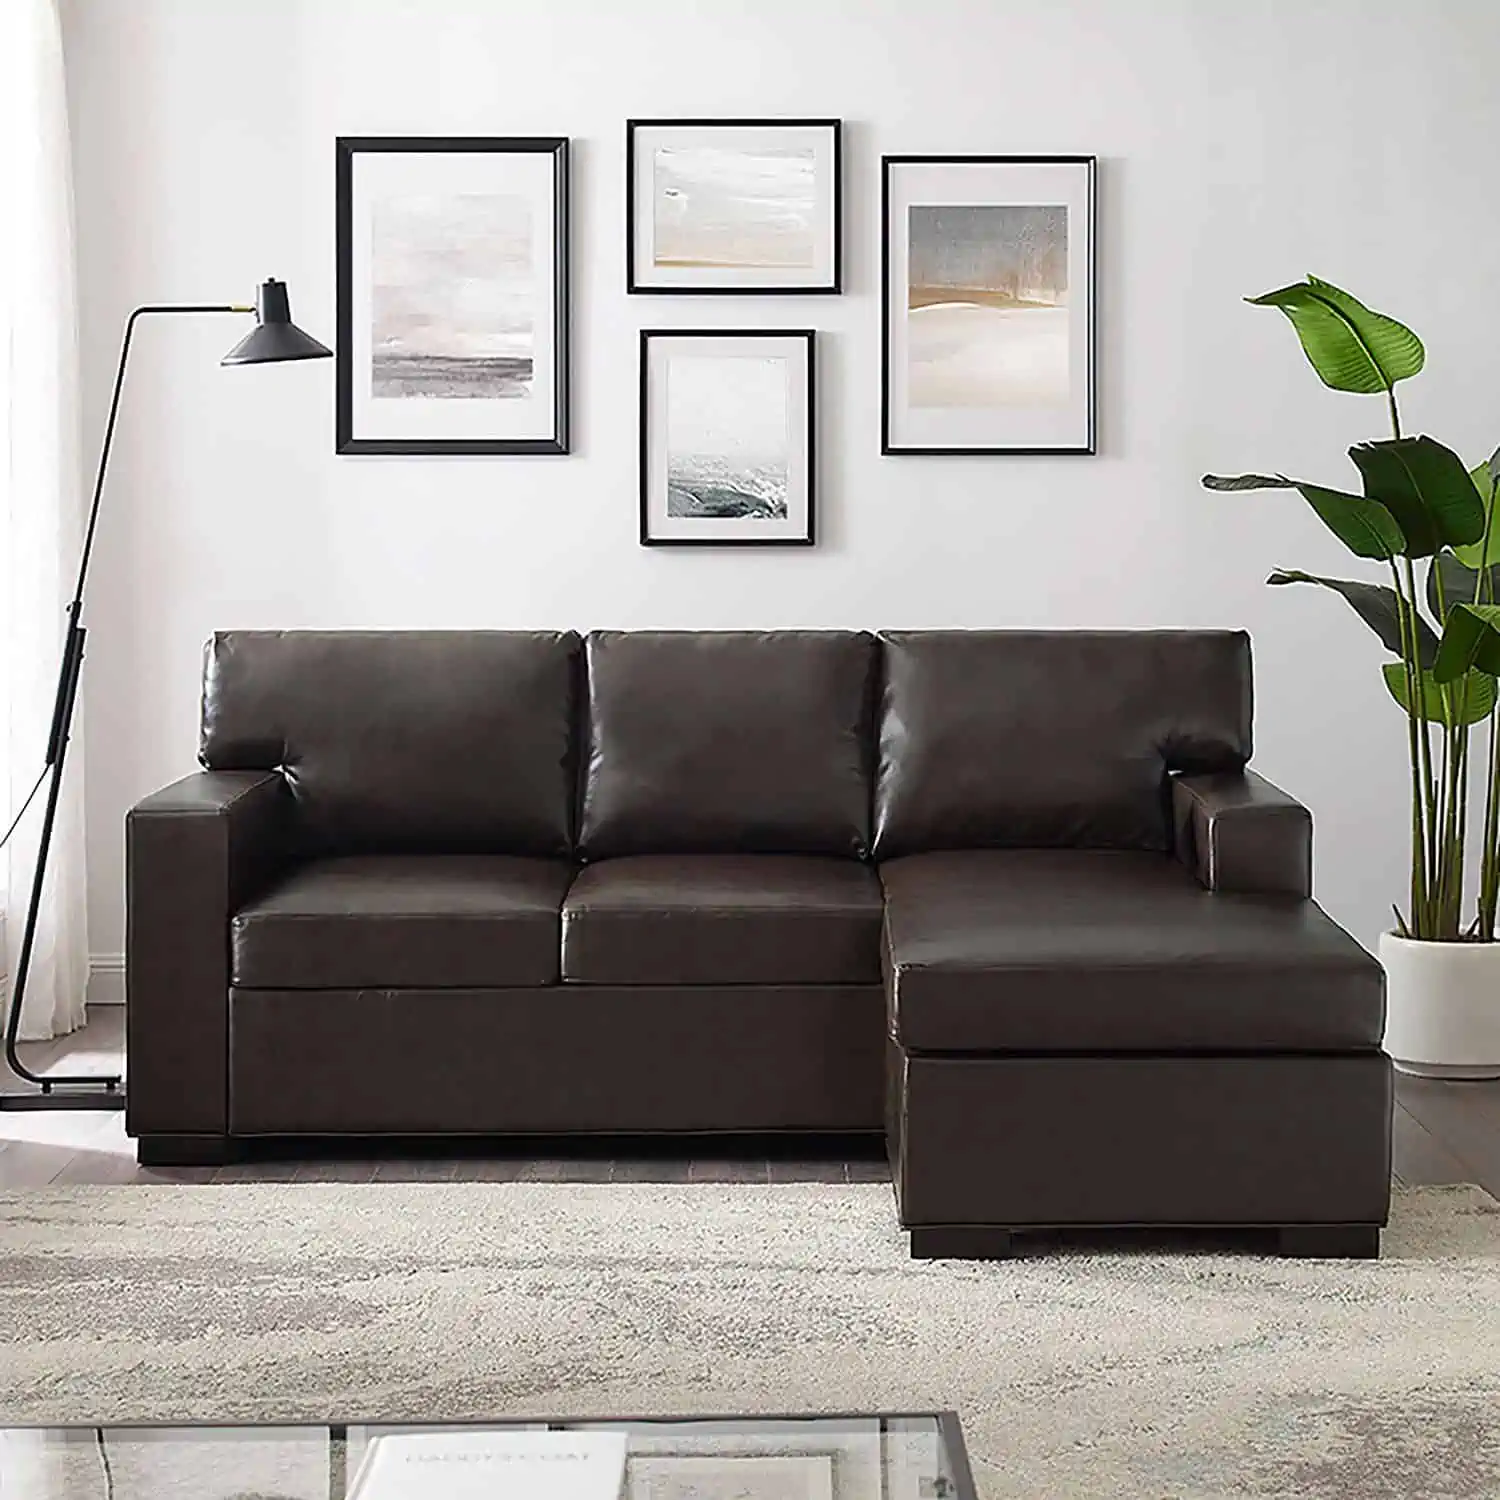 A brown leather sectional couch in a living room from Sam\'s Club.